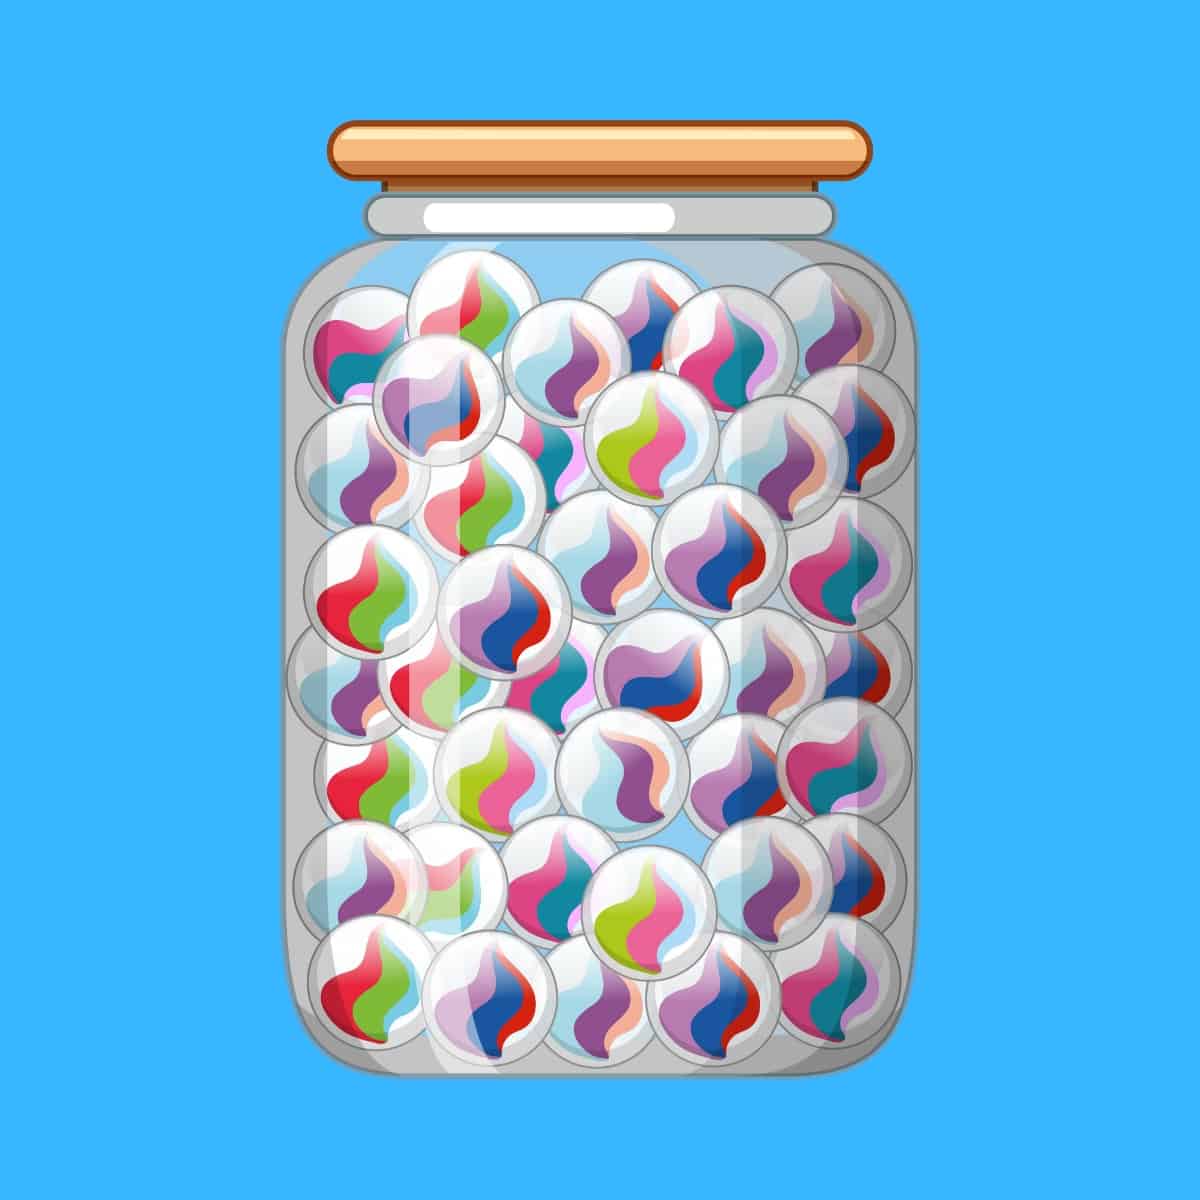 Cartoon graphic of a jar filled with marbles on a blue background.